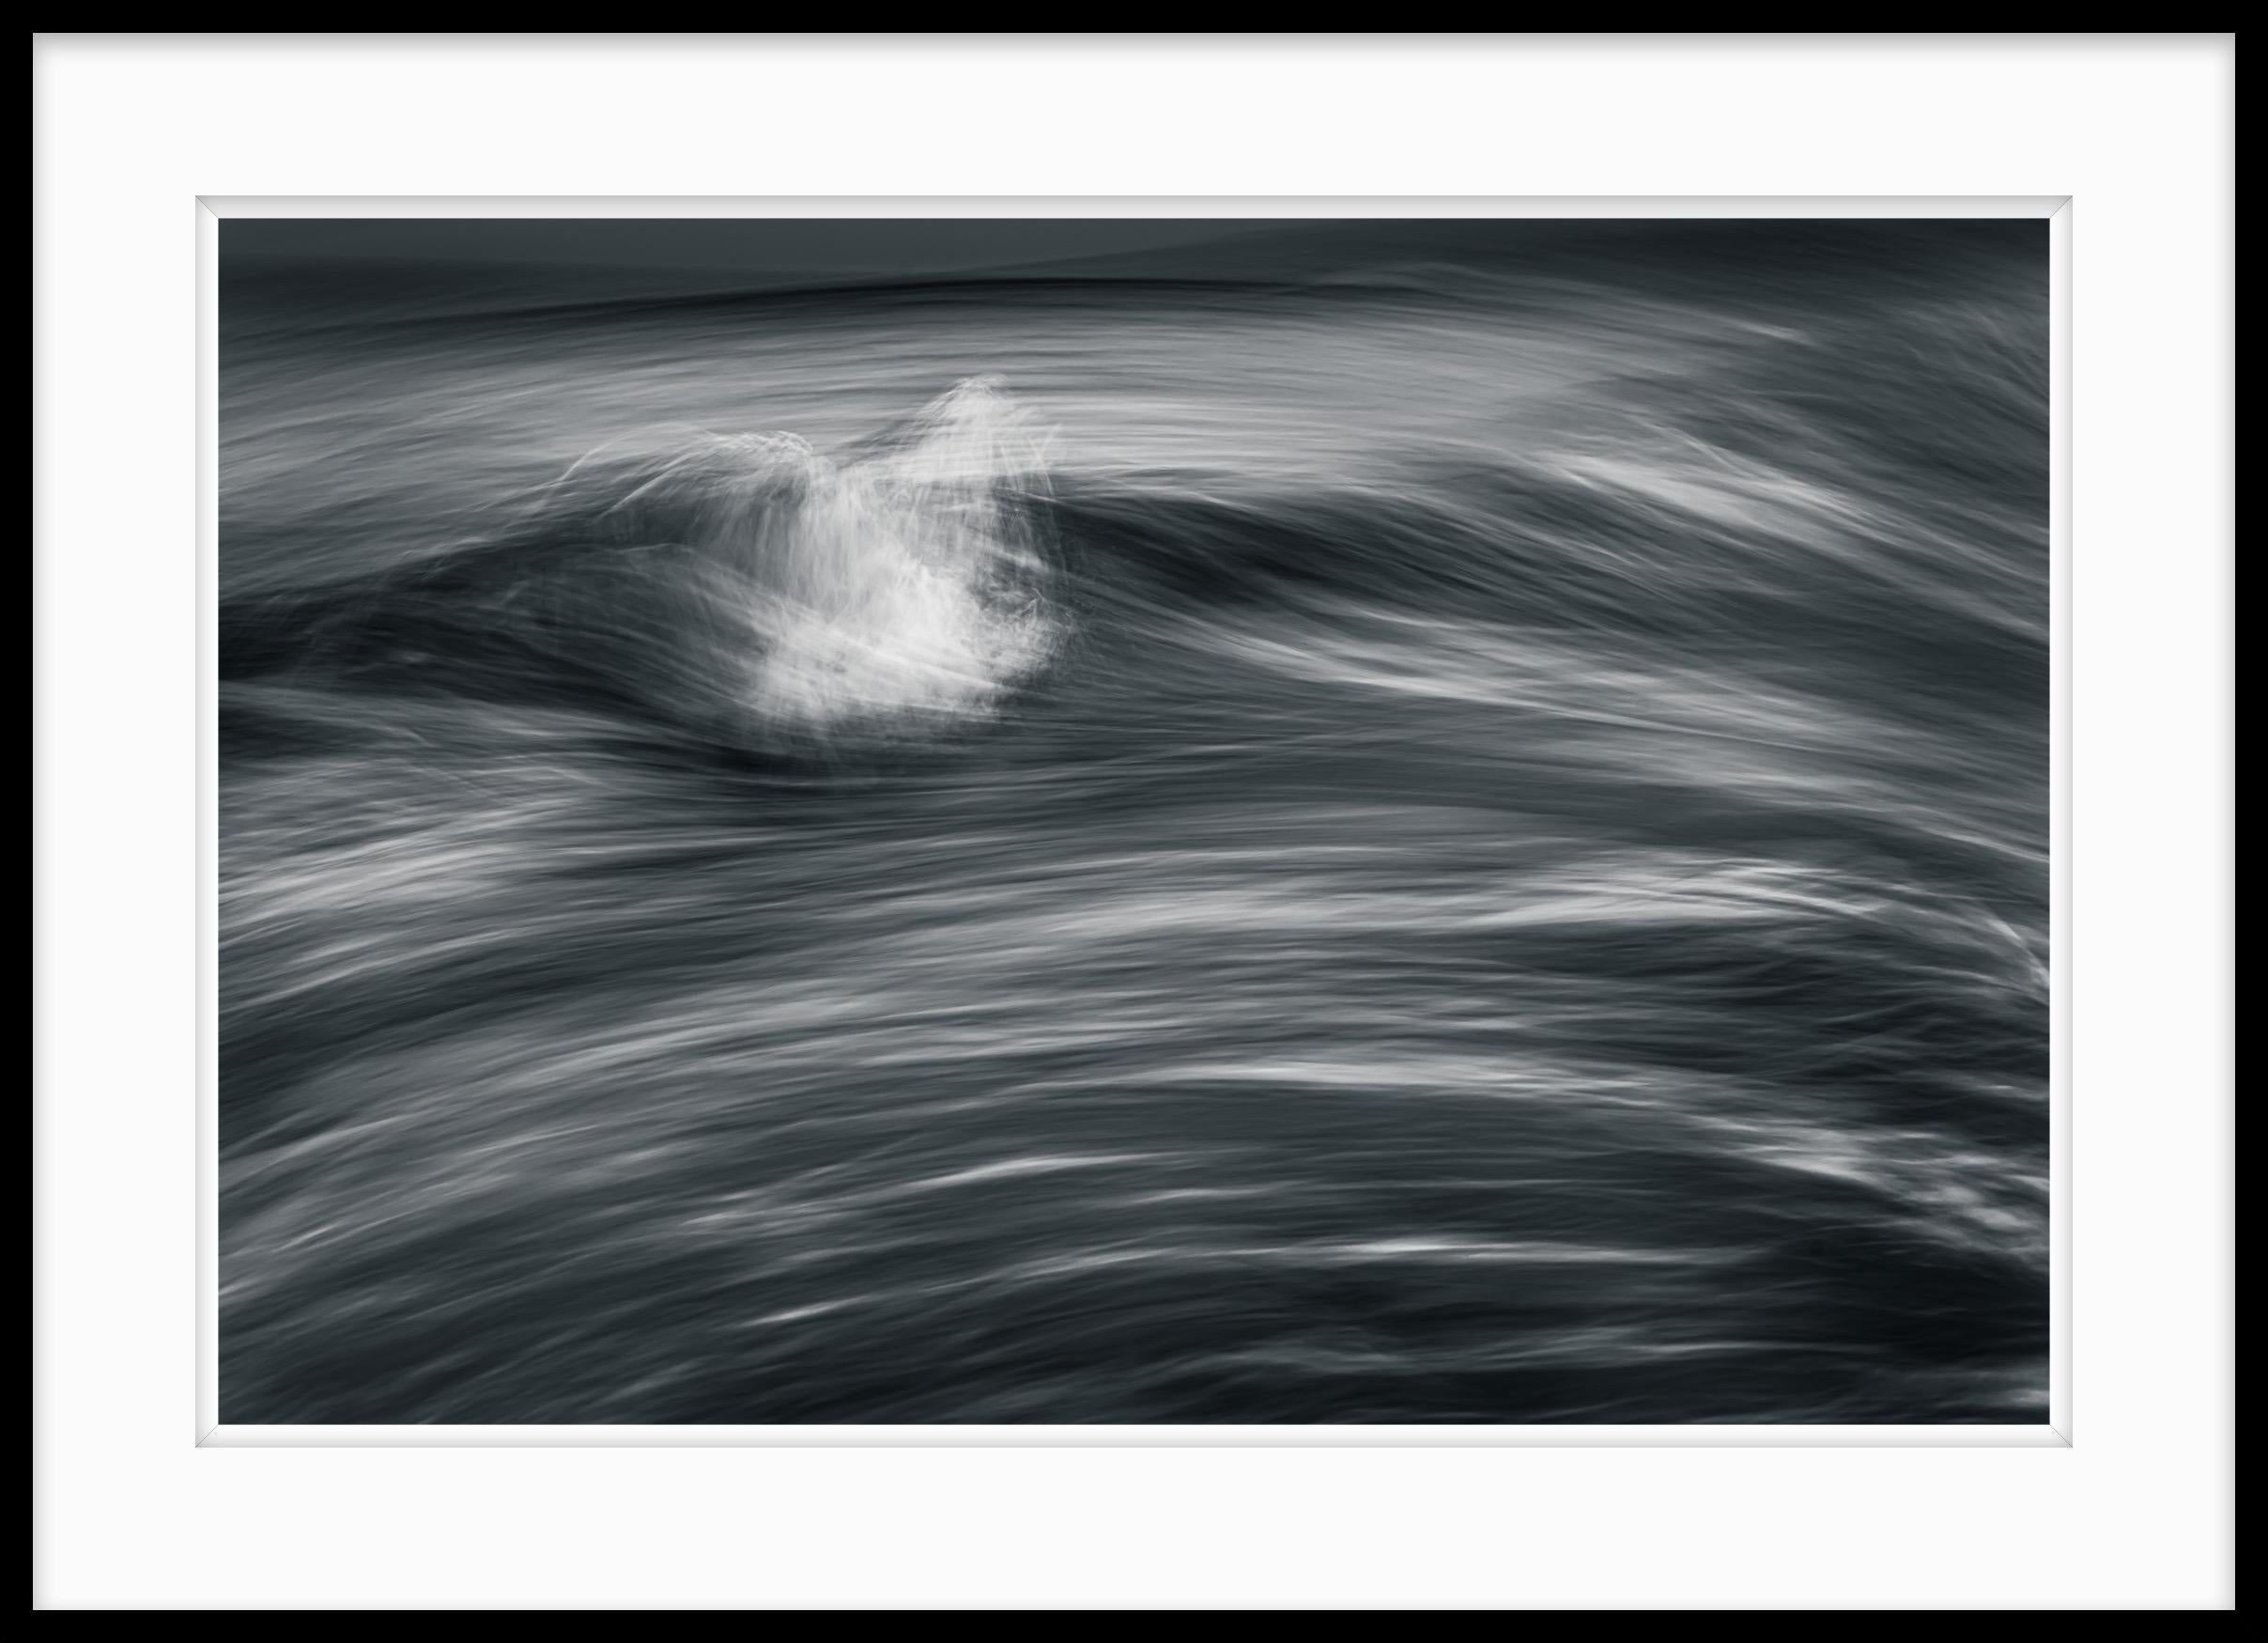 This is #96 from the Kinetic Solitude series. The series has been shown in the Dow Museum of Fine Arts as part of a exhibition that explored variations on the theme of water.

My photographic series “Kinetic Solitude” seeks to create visual imagery